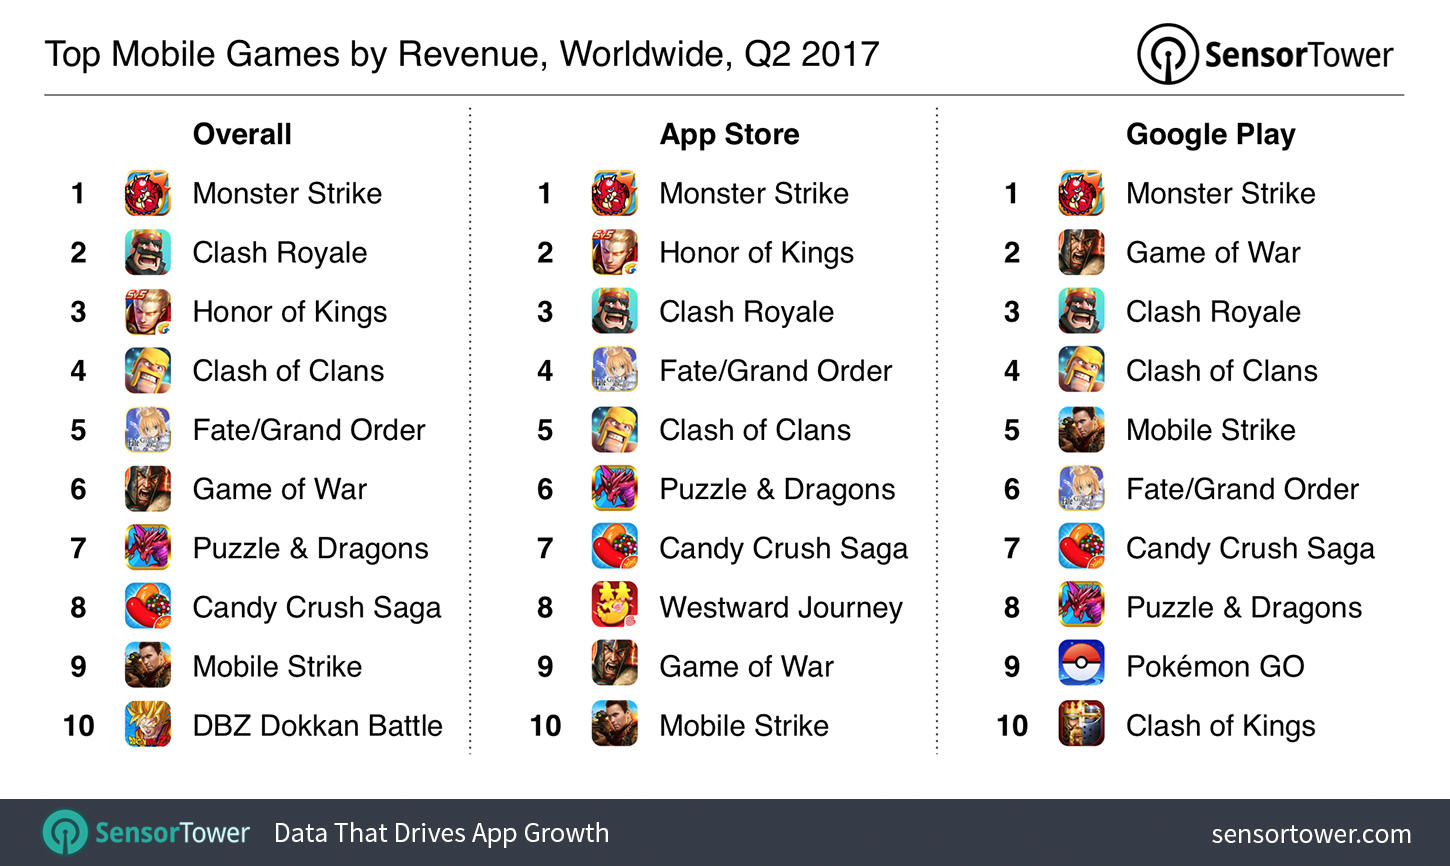 Q2 2017's Top Mobile Games by Revenue